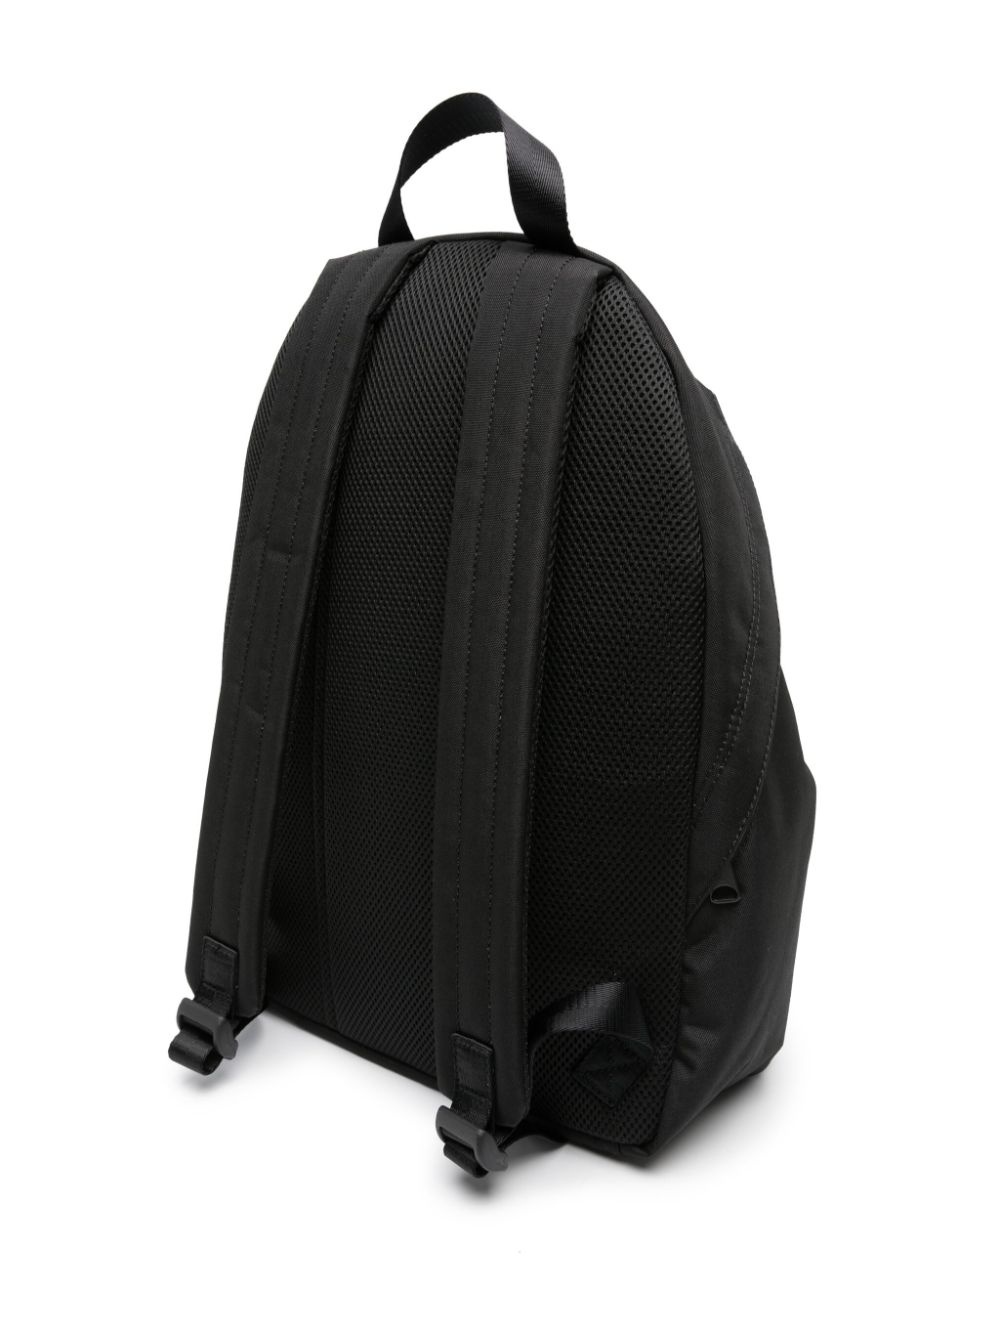 D-BSC backpack - 3